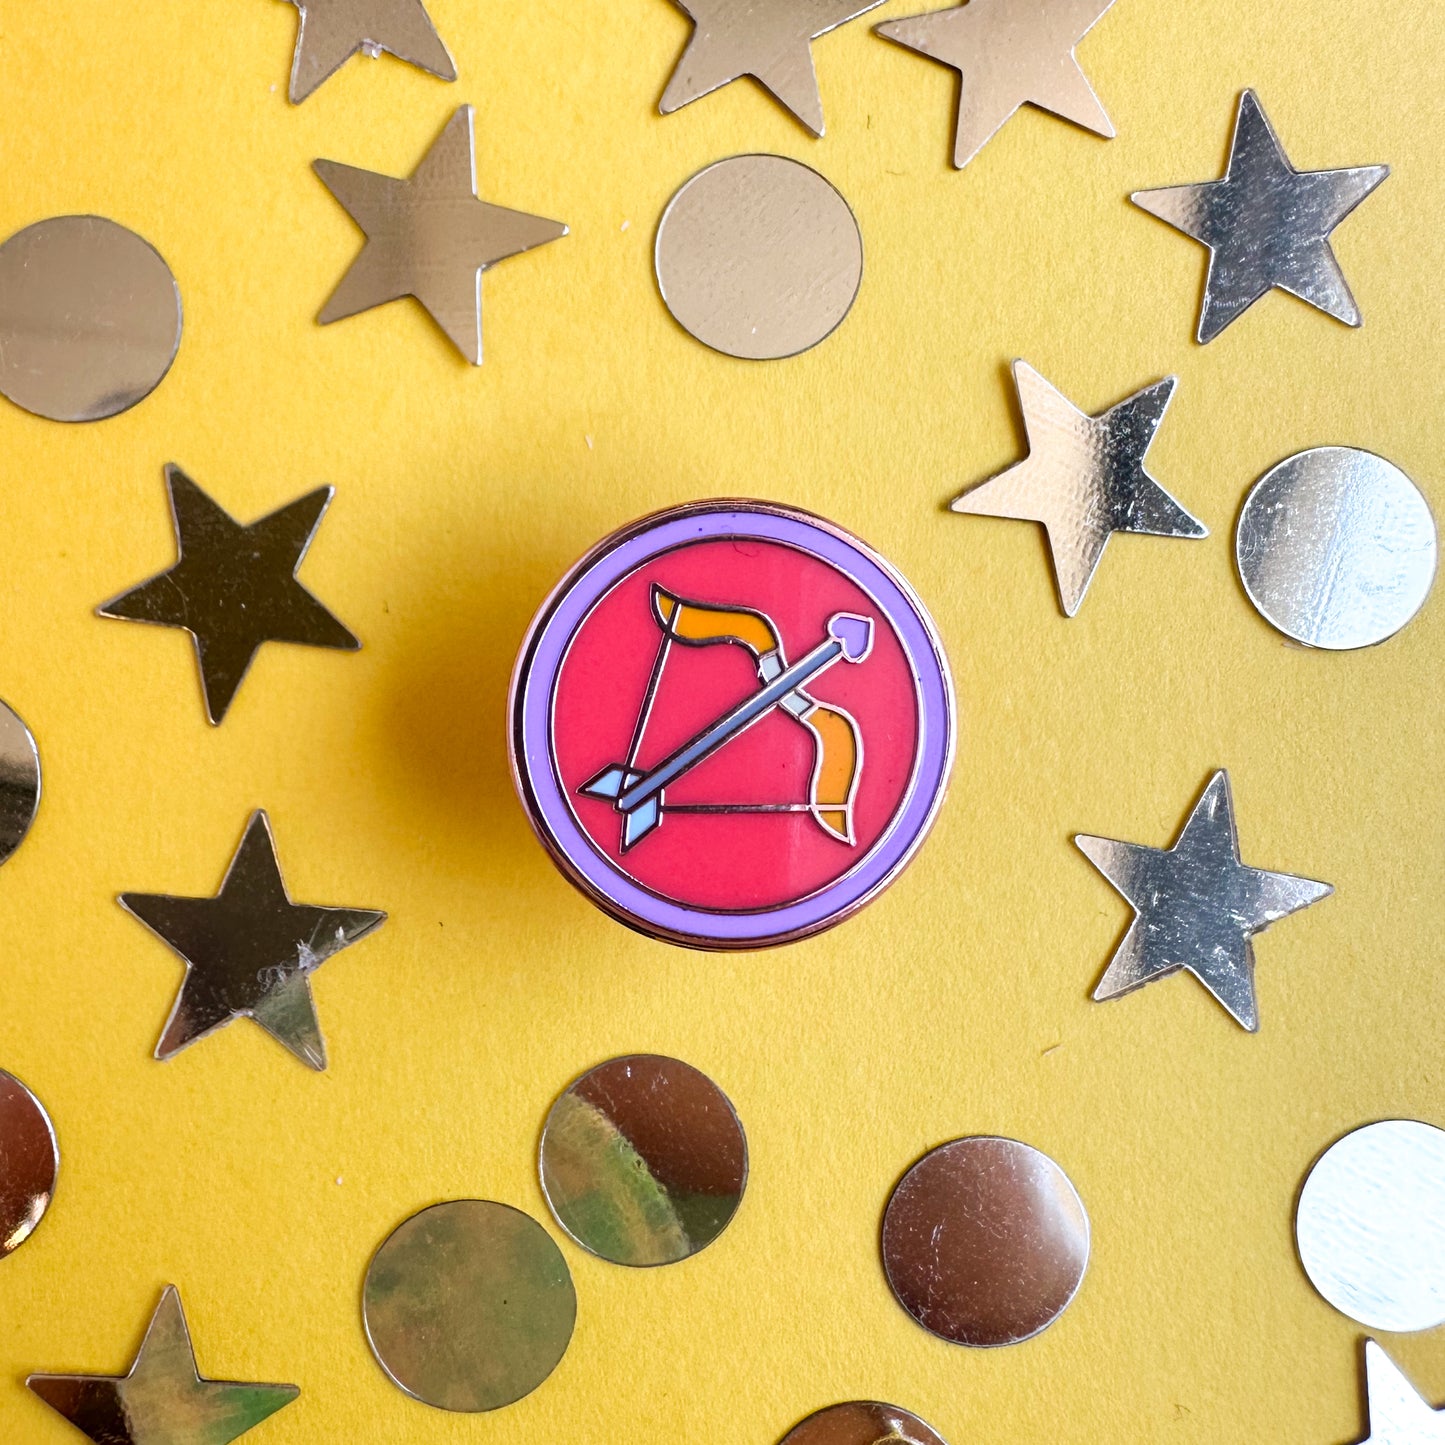 A circle enamel pin with a cute pink bow and arrow in it to represent Sagittarius. The pin is on a yellow background with gold confetti around it. 